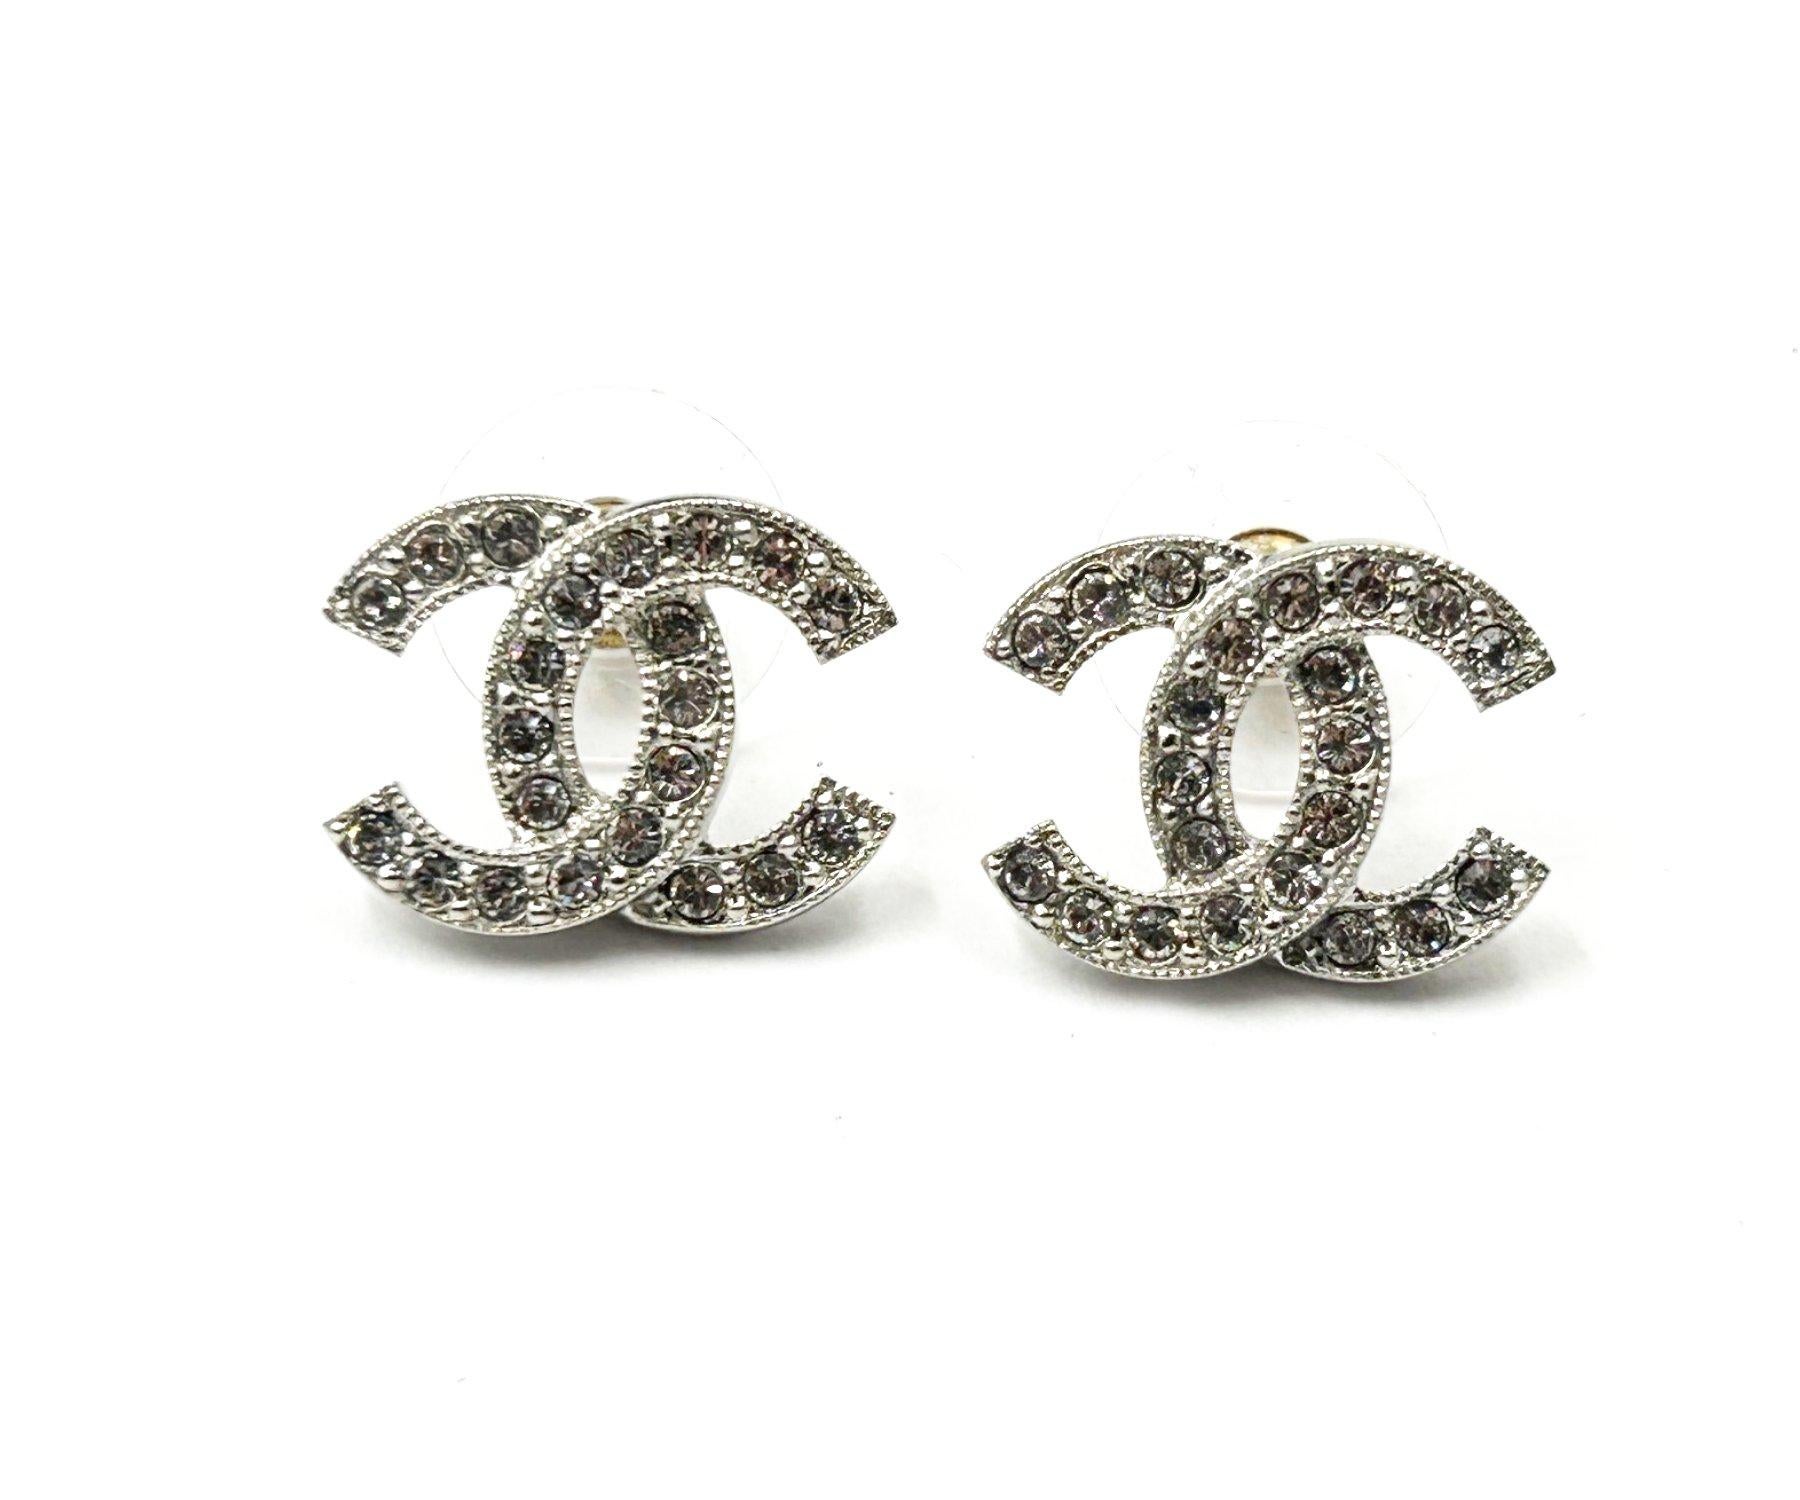 Chanel Classic Iconic Silver CC Crystal Reissued Medium Piercing Earrings

*Marked 22
*Made in France
*Comes with the original box, pouch and booklet

-It is approximately 0.55